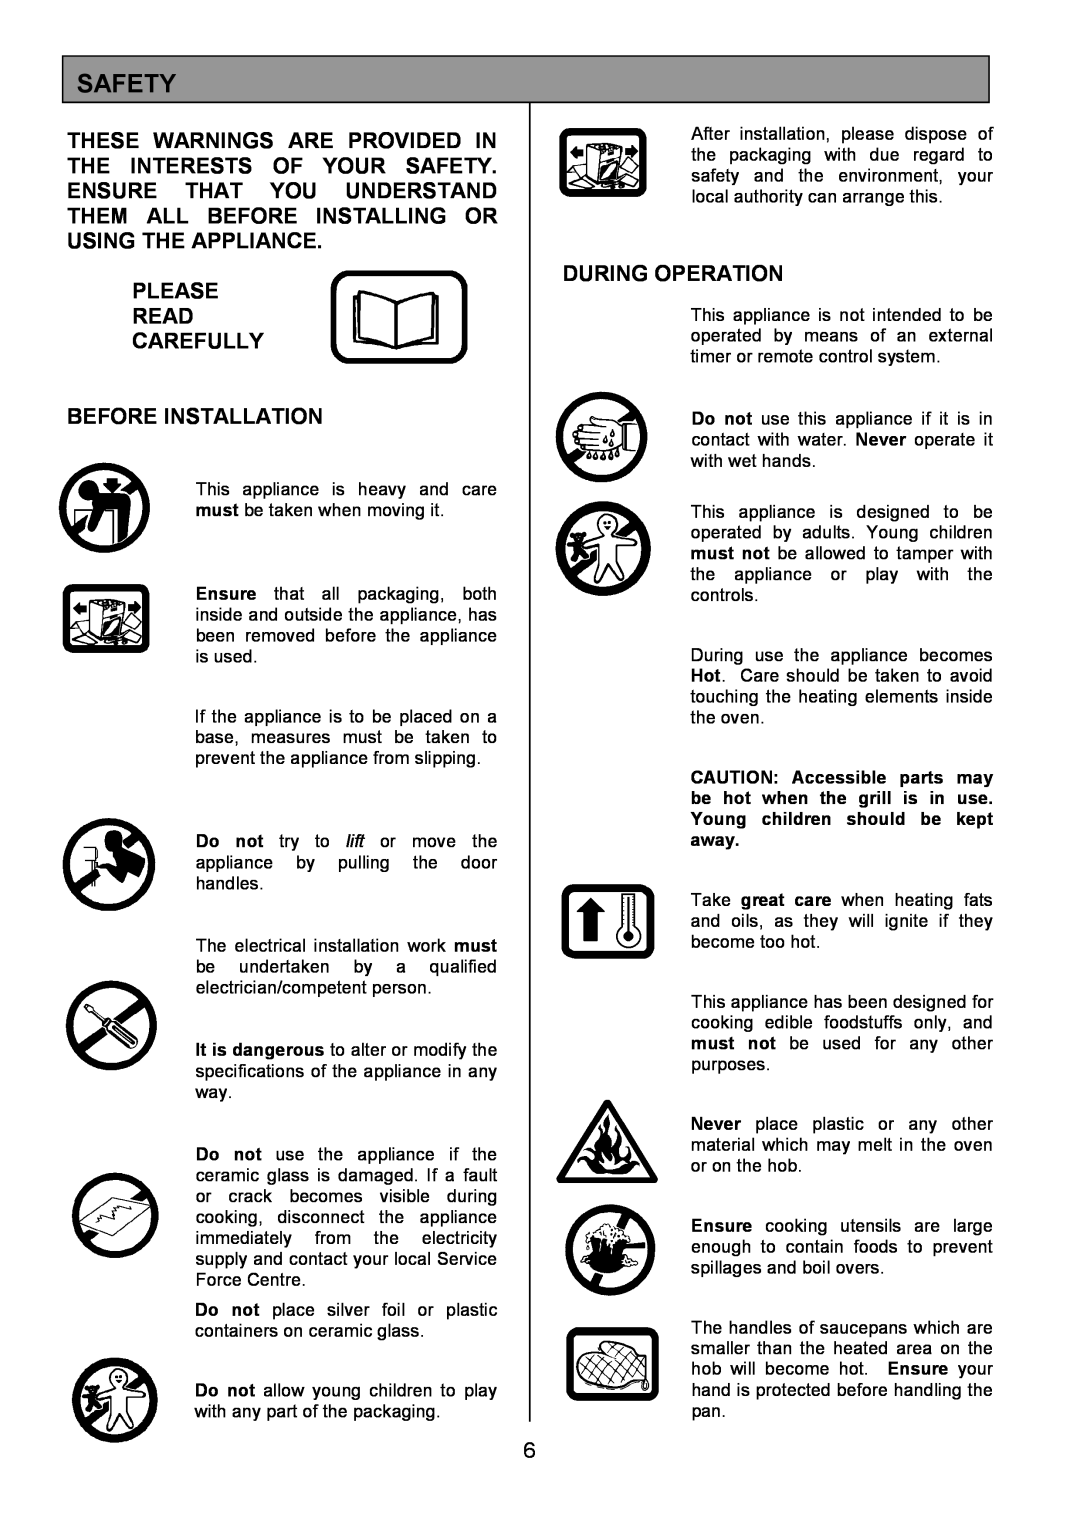 Zanussi ZCE 8021 manual Safety, Please Read Carefully Before Installation, During Operation 